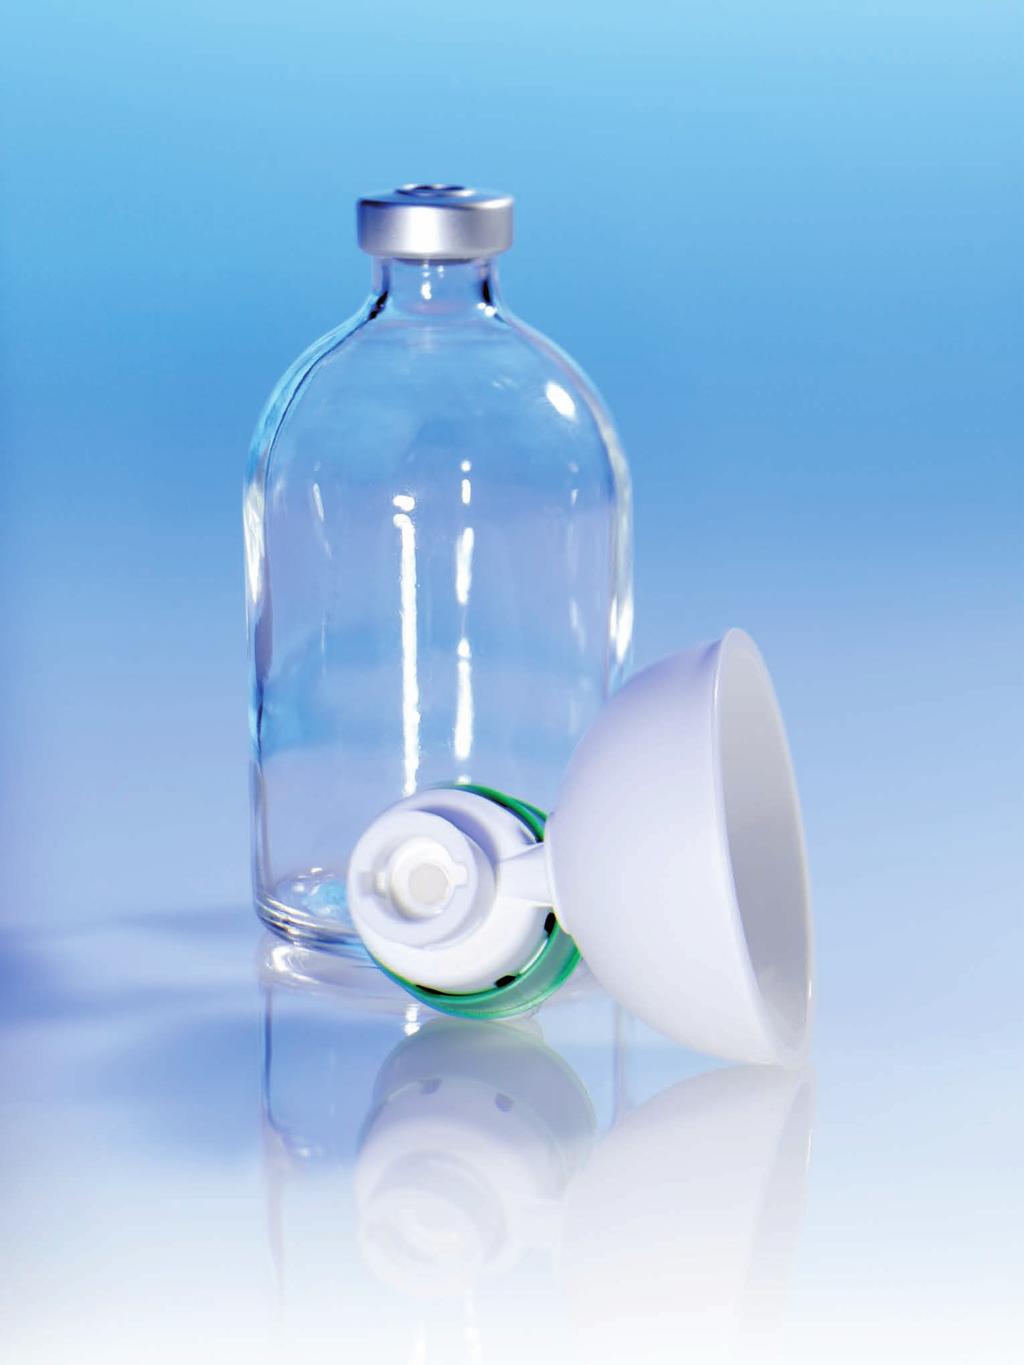 BD PhaSeal Protector The Protector is a pressure equalization device which is permanently attached to the vial.